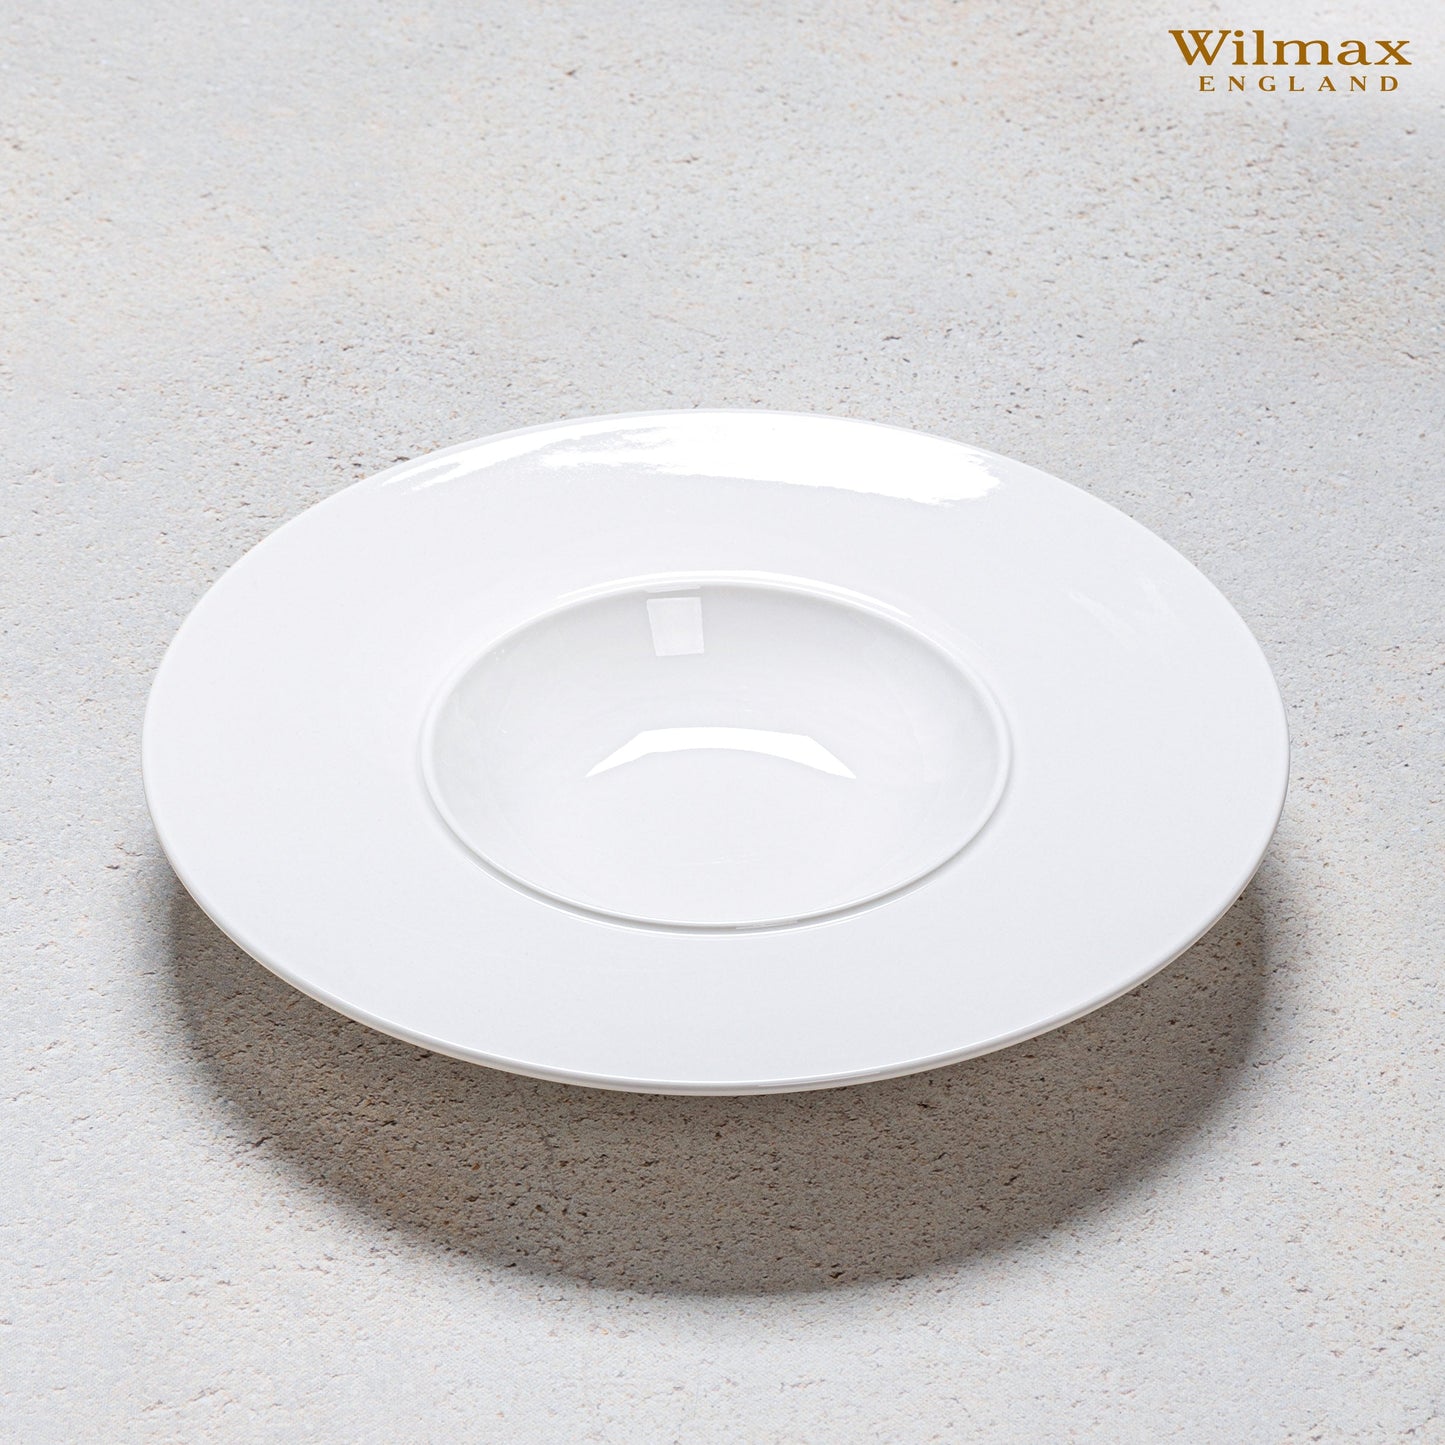 Small Batch Porcelain - White Deep Plate 11" inch -11